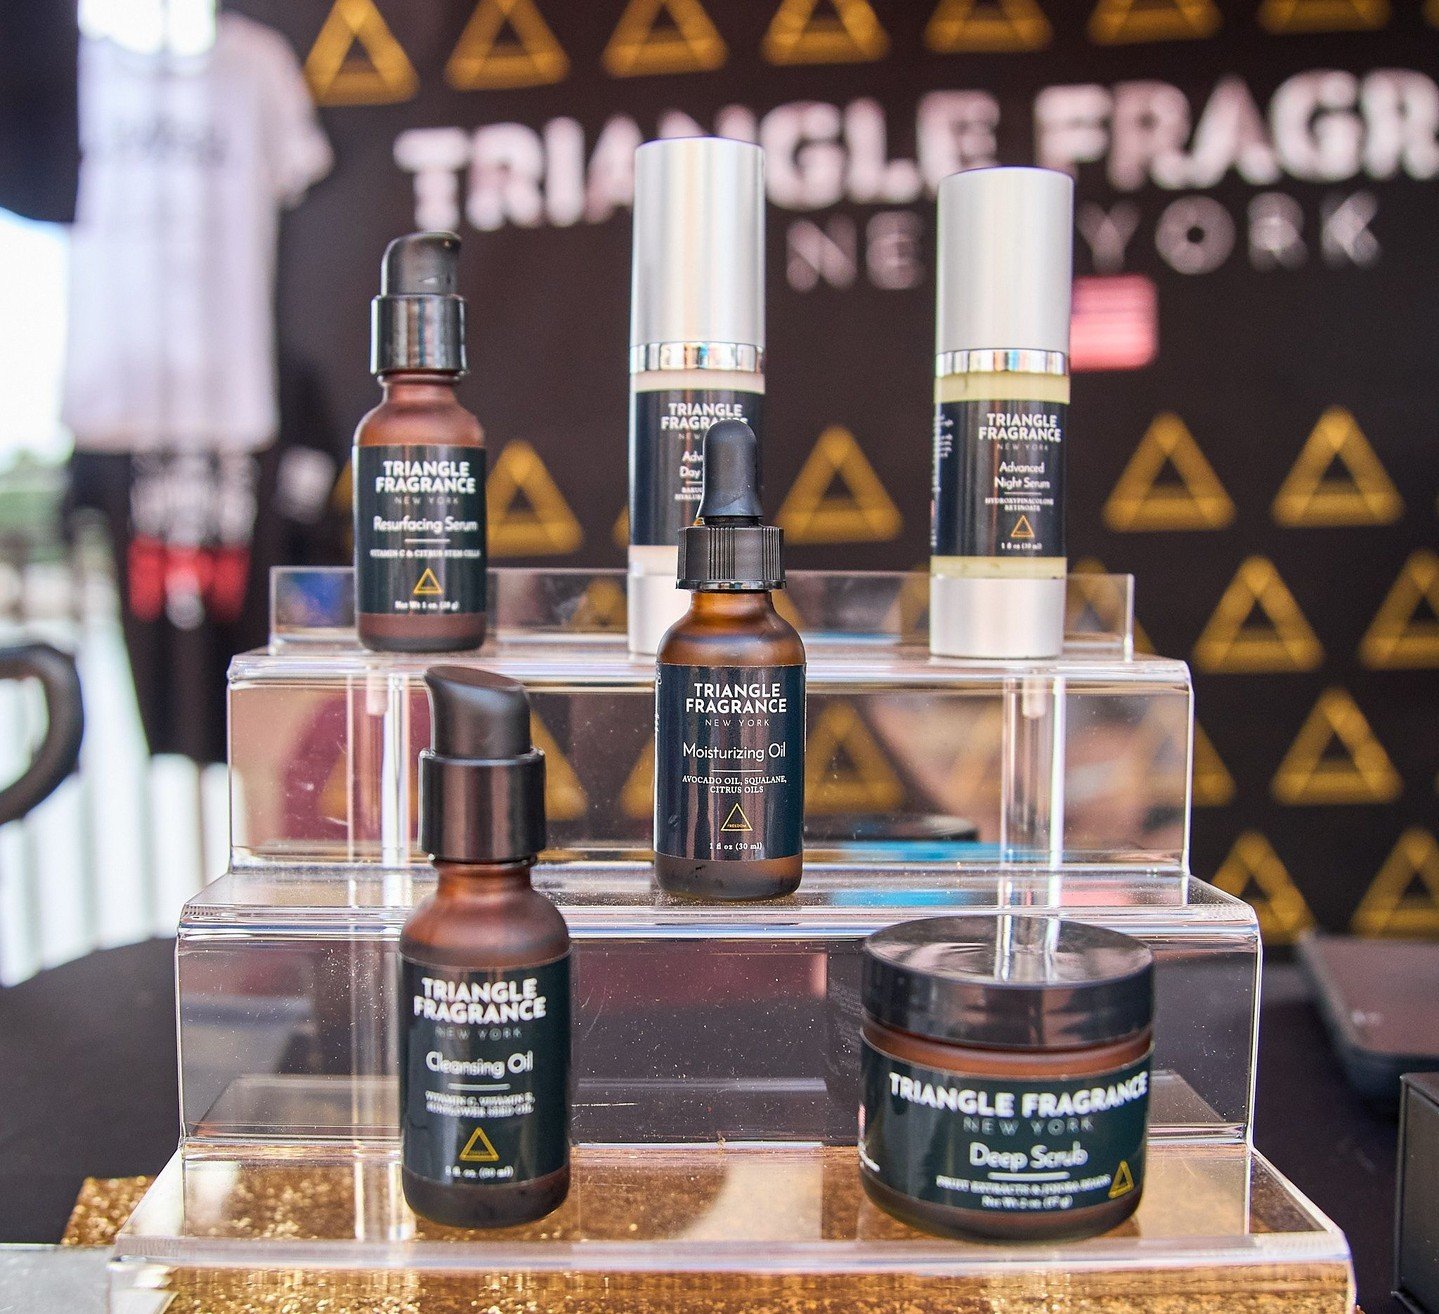 Had the pleasure of meeting Magda Khalifa of @trianglefragrance at this years Bacon and Bourbon Festival. 100% clean and USA made fragrances, which is hard to come by these days. Be sure to check out her products!
.
.
.
📸 For Bacon and Bourbon Fest
